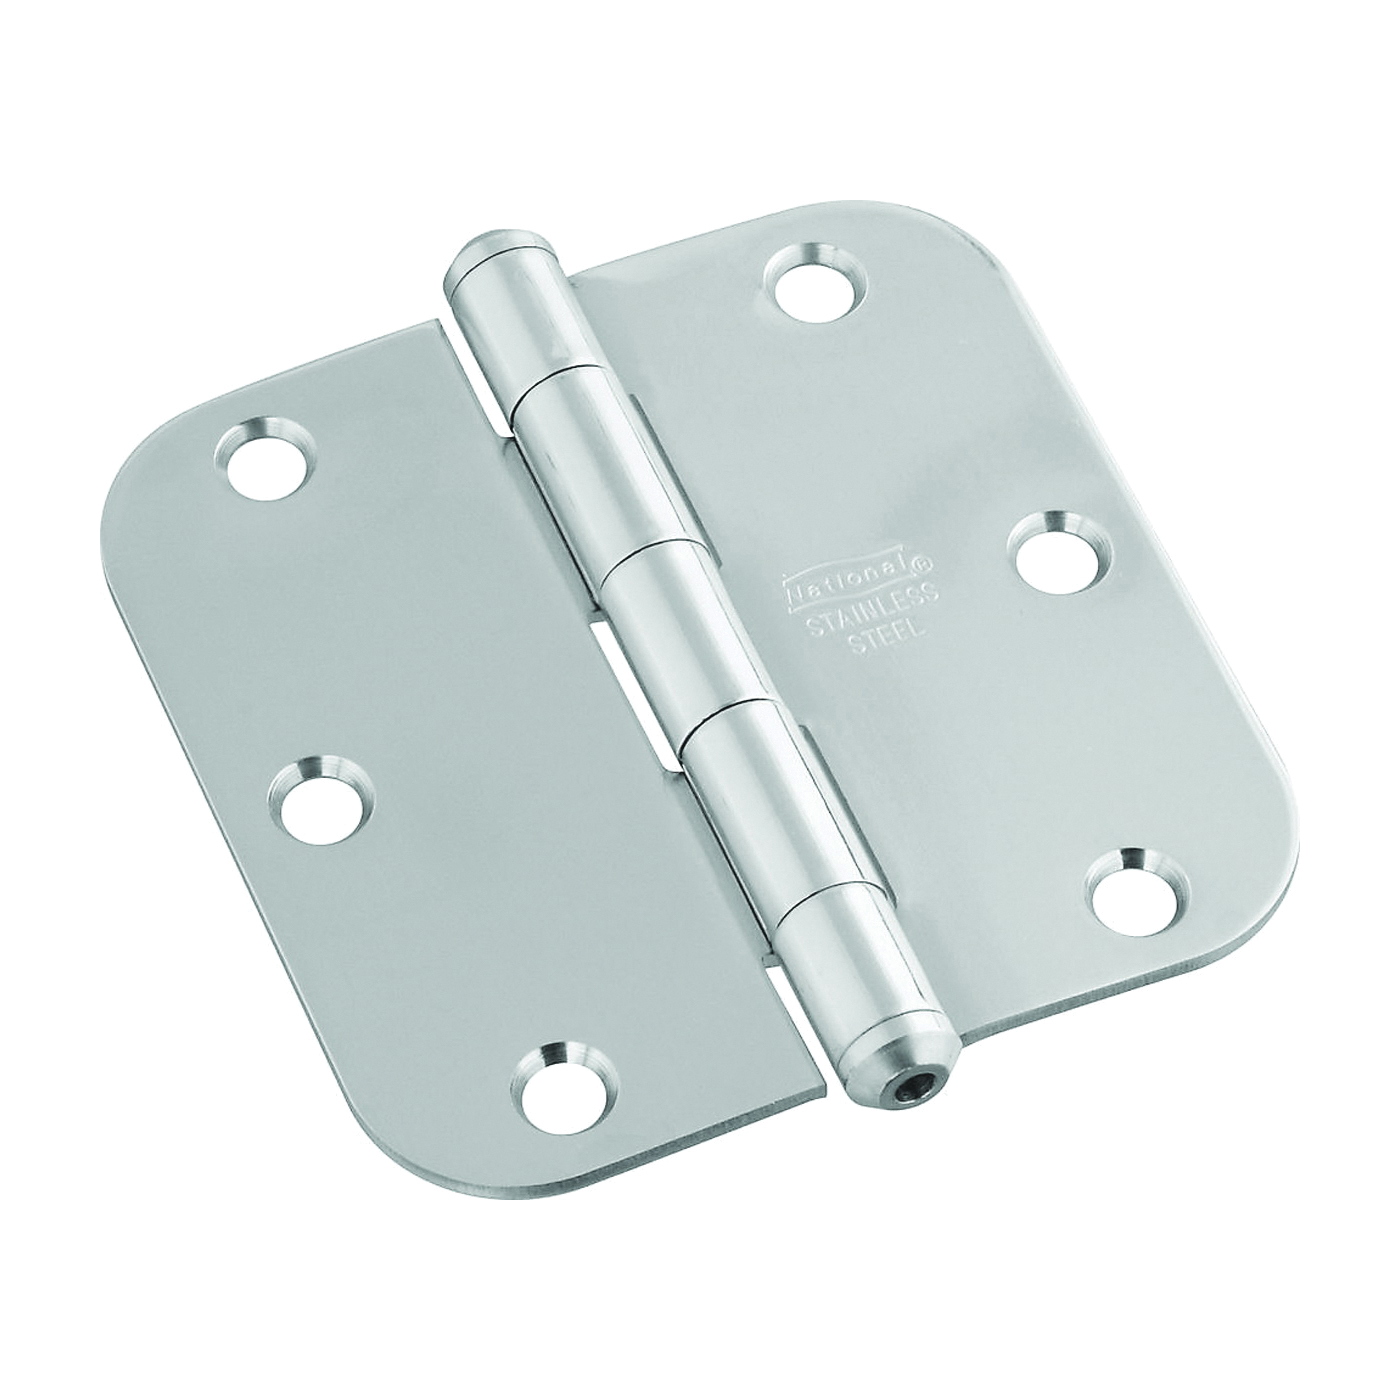 N830-269 Door Hinge, Stainless Steel, Zinc, Non-Rising, Removable Pin, Full-Mortise Mounting, 55 lb